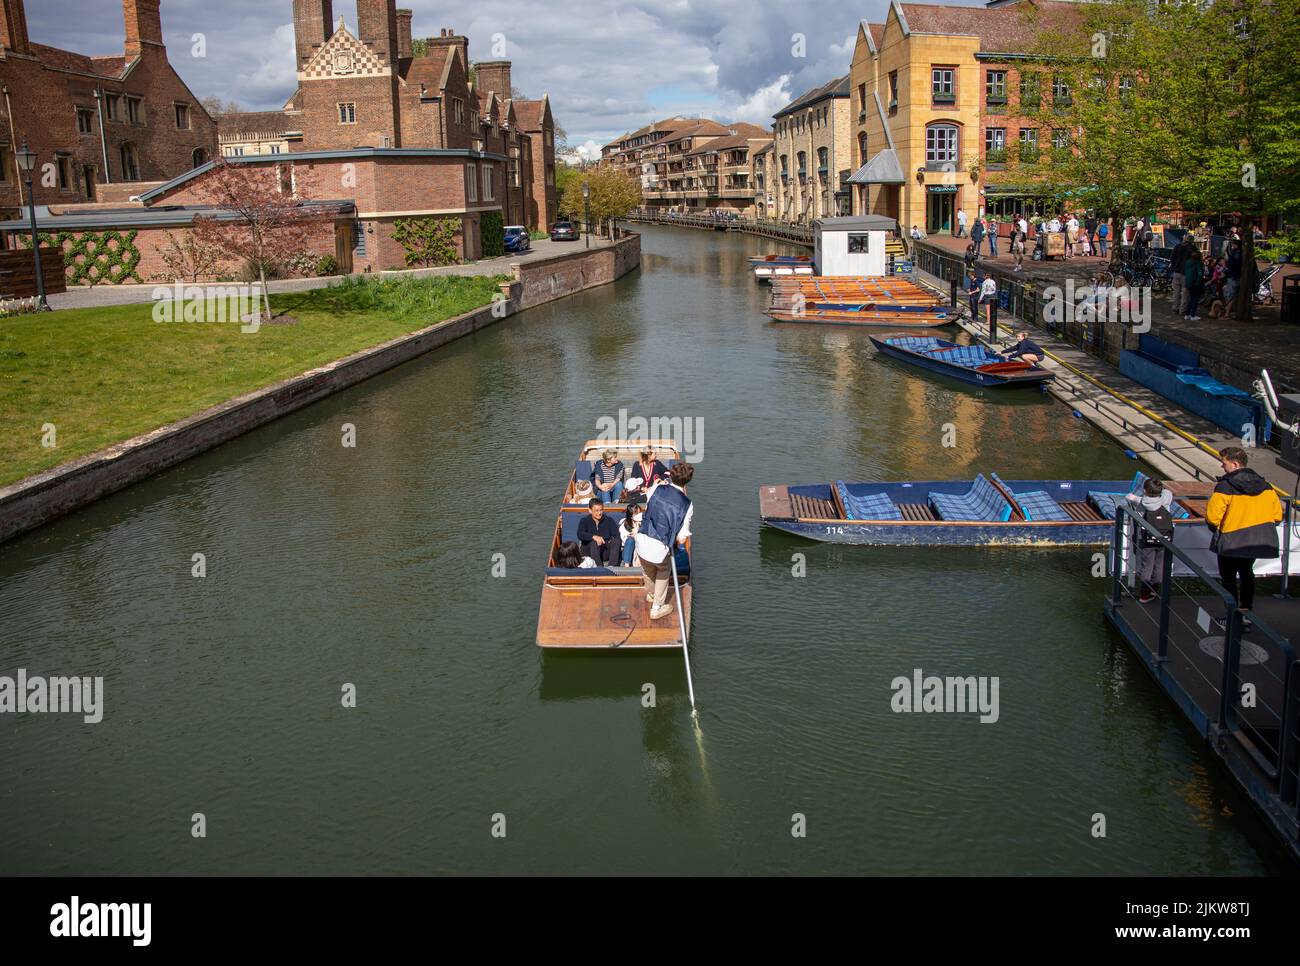 A high-angle shot of people punting on the river Cam in Cambridge during the daytime Stock Photo